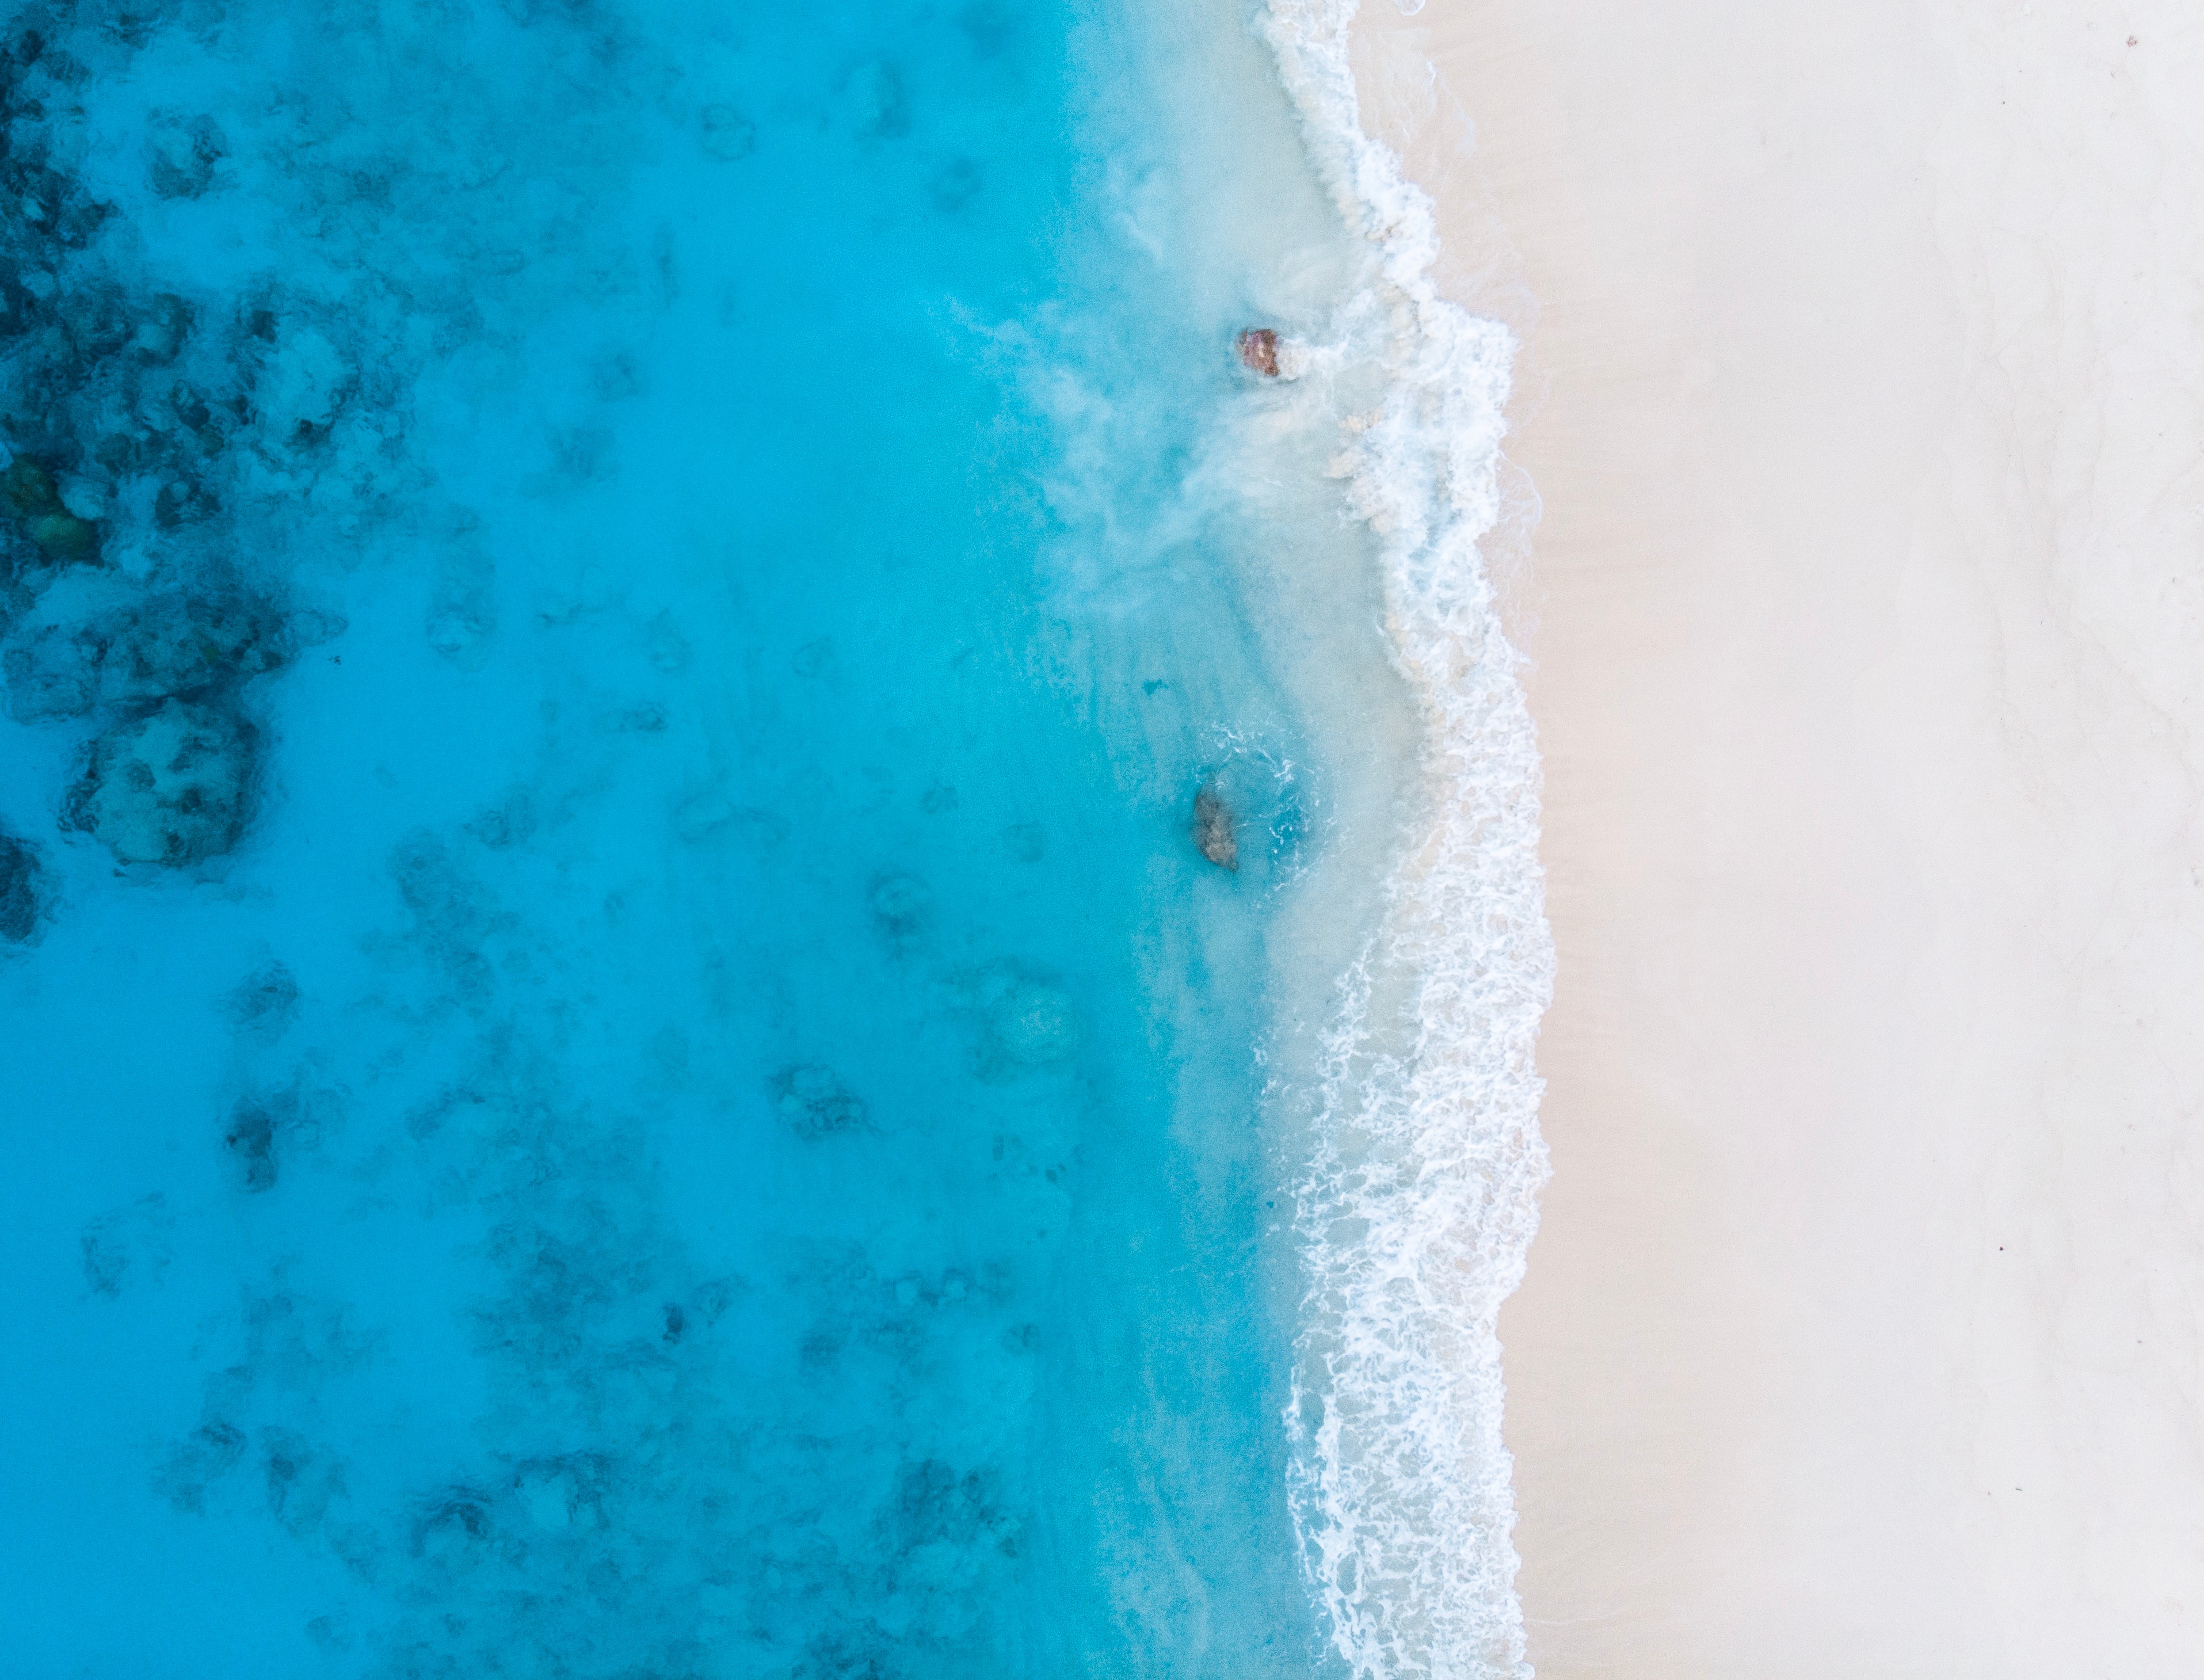 android sea, nature, beach, view from above, coast, surf